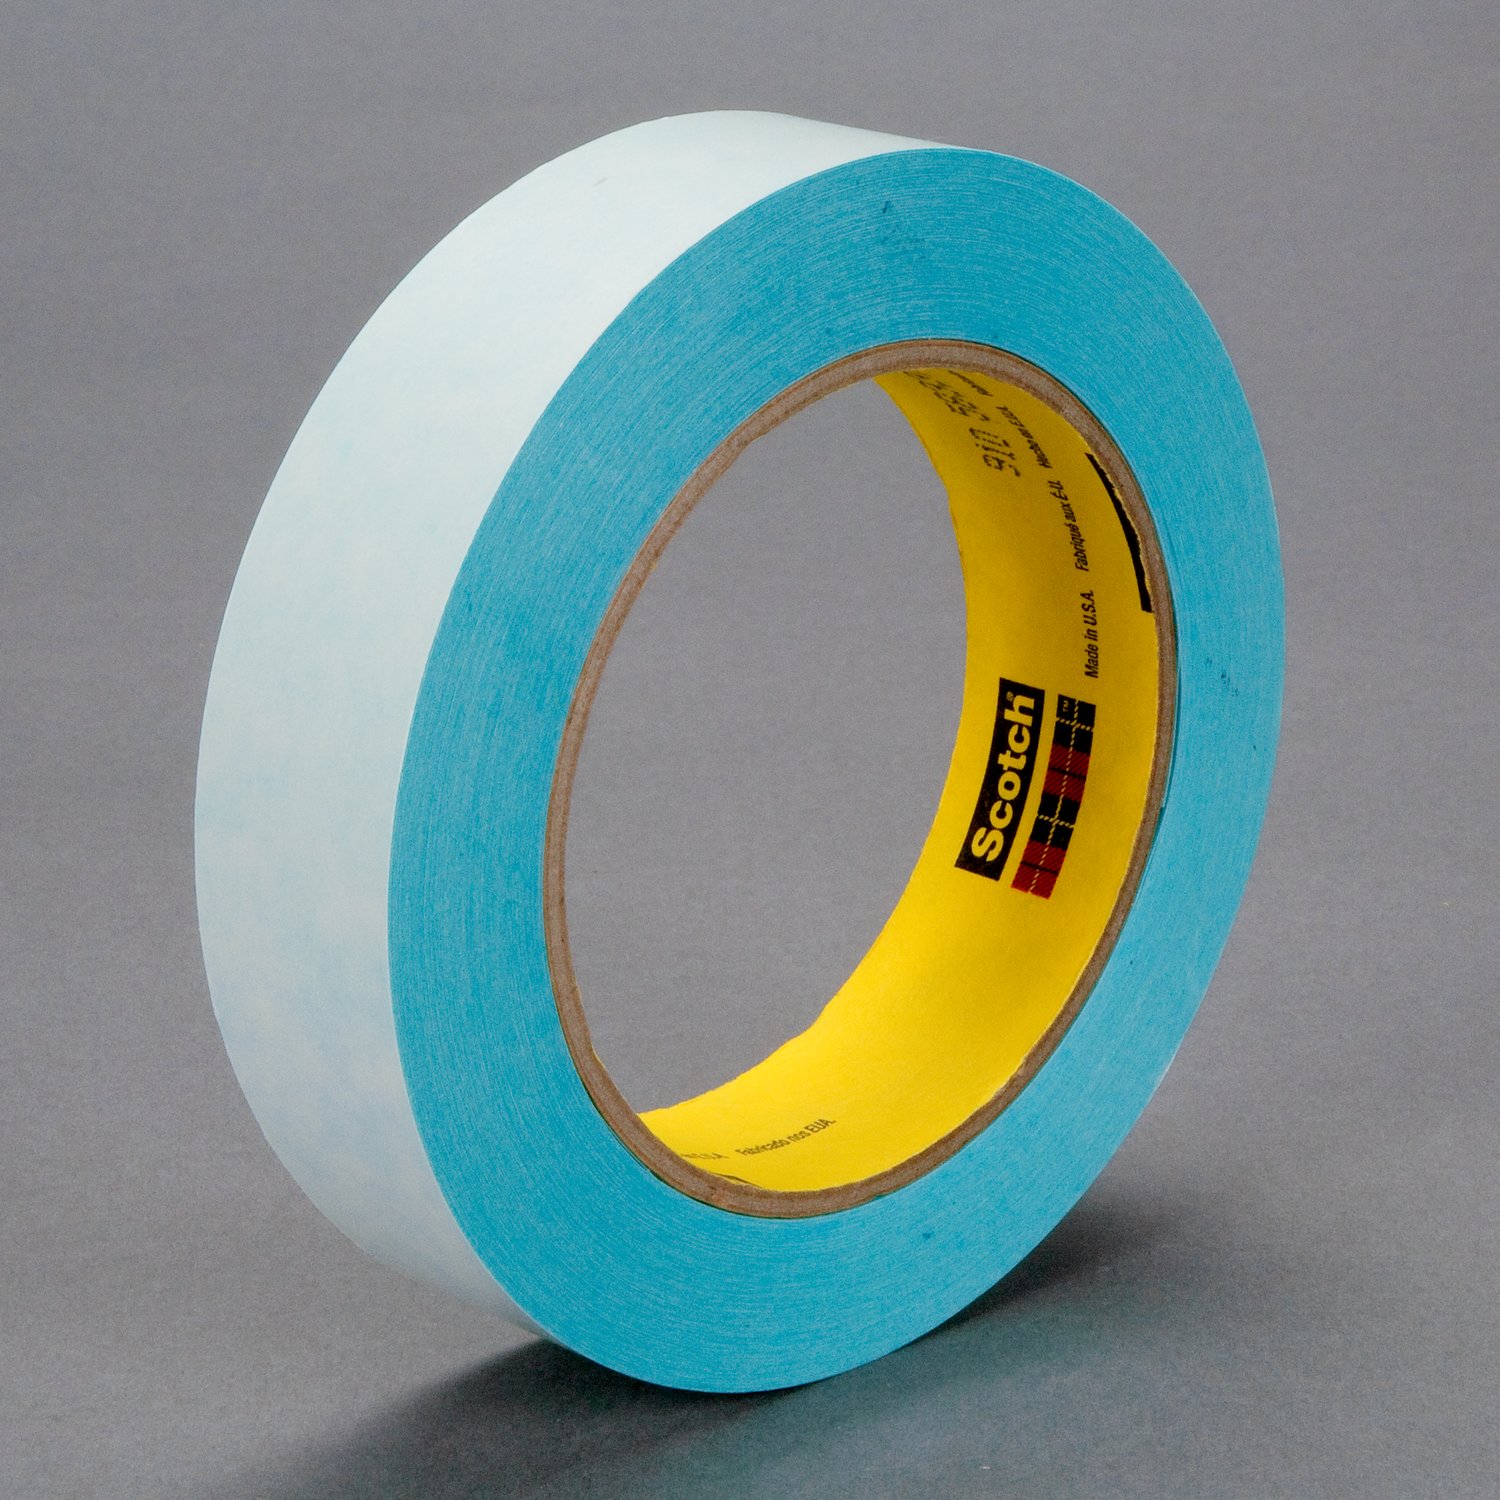 7100048957 - 3M Repulpable Single Coated Splicing Tape 910, Blue, 3.7 mil, Roll,
Config